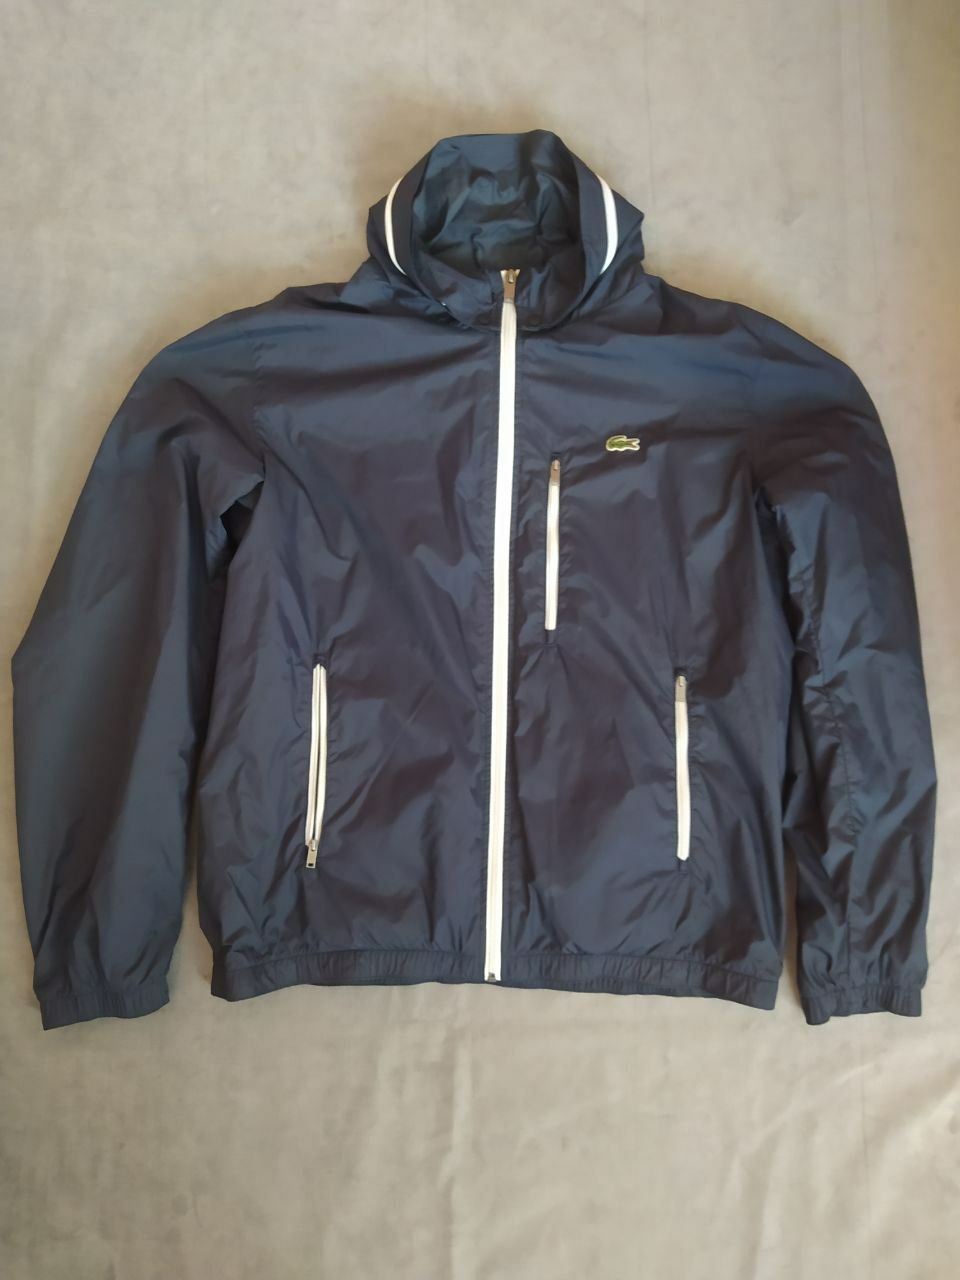 Lacoste casual outfit windbreaker